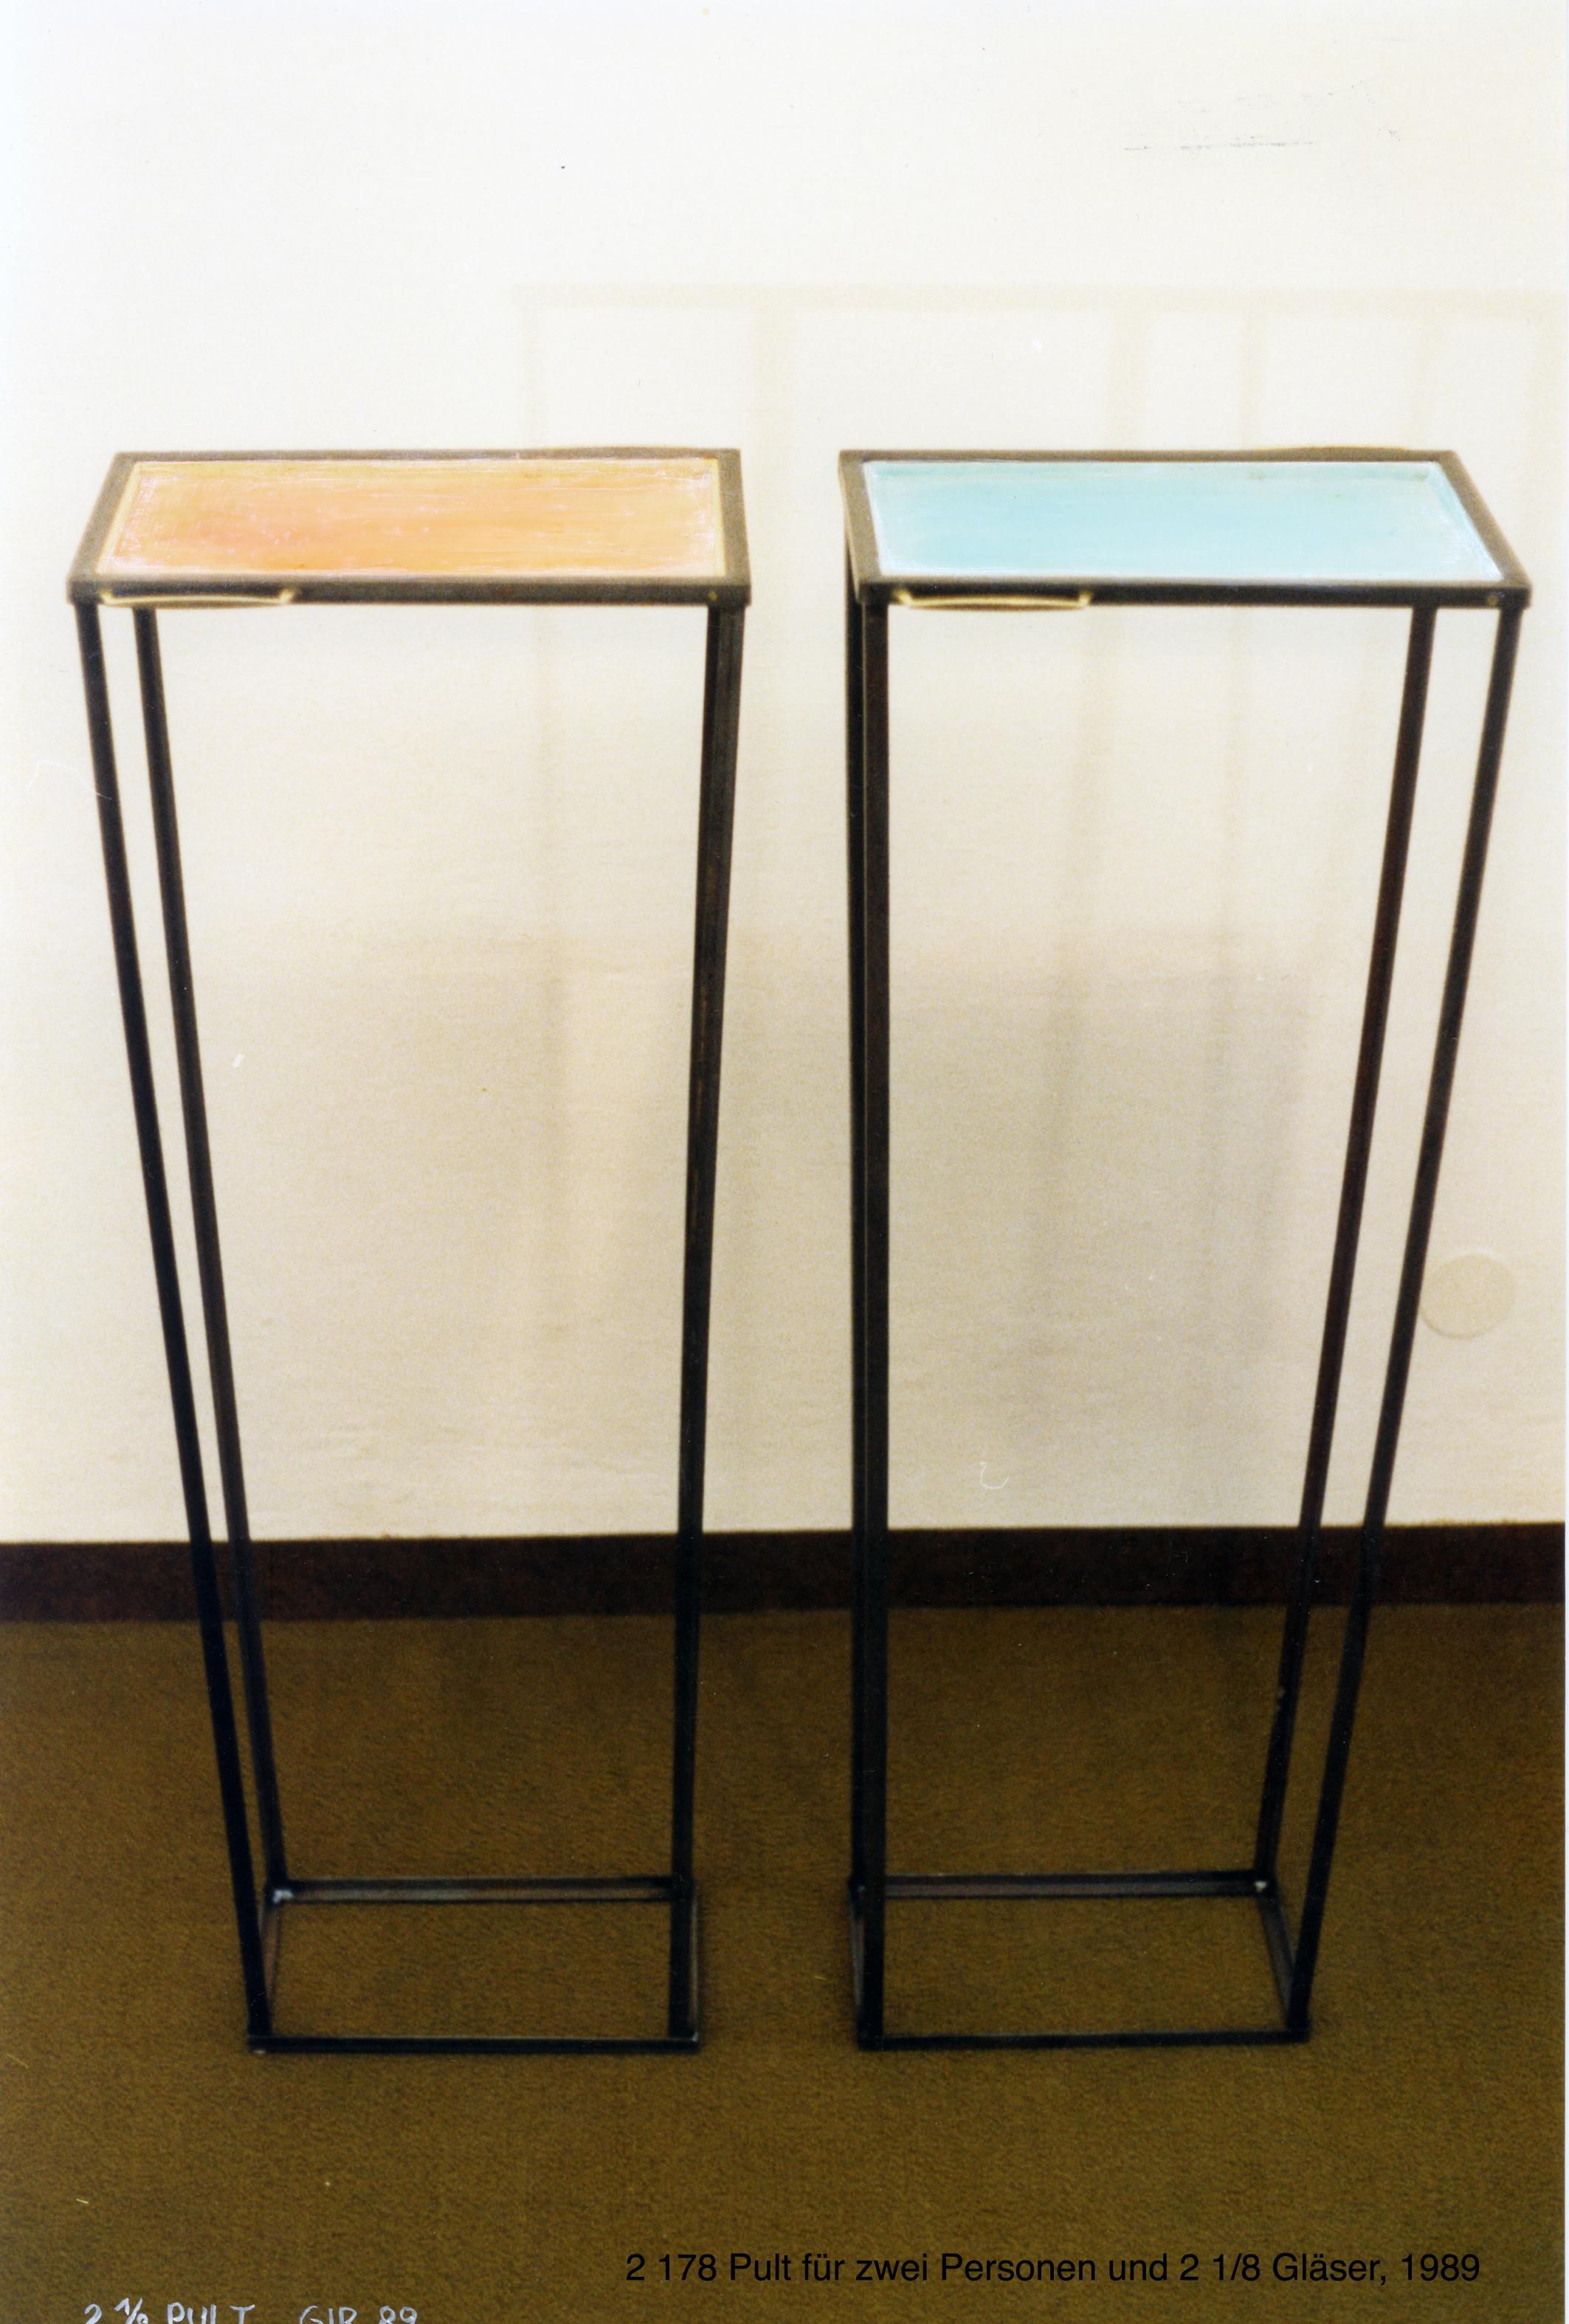 For two people (handles) and two eighth glasses, iron, brass, Resopal, wood, paint, 121 x 41,5 x 30 cm, in series